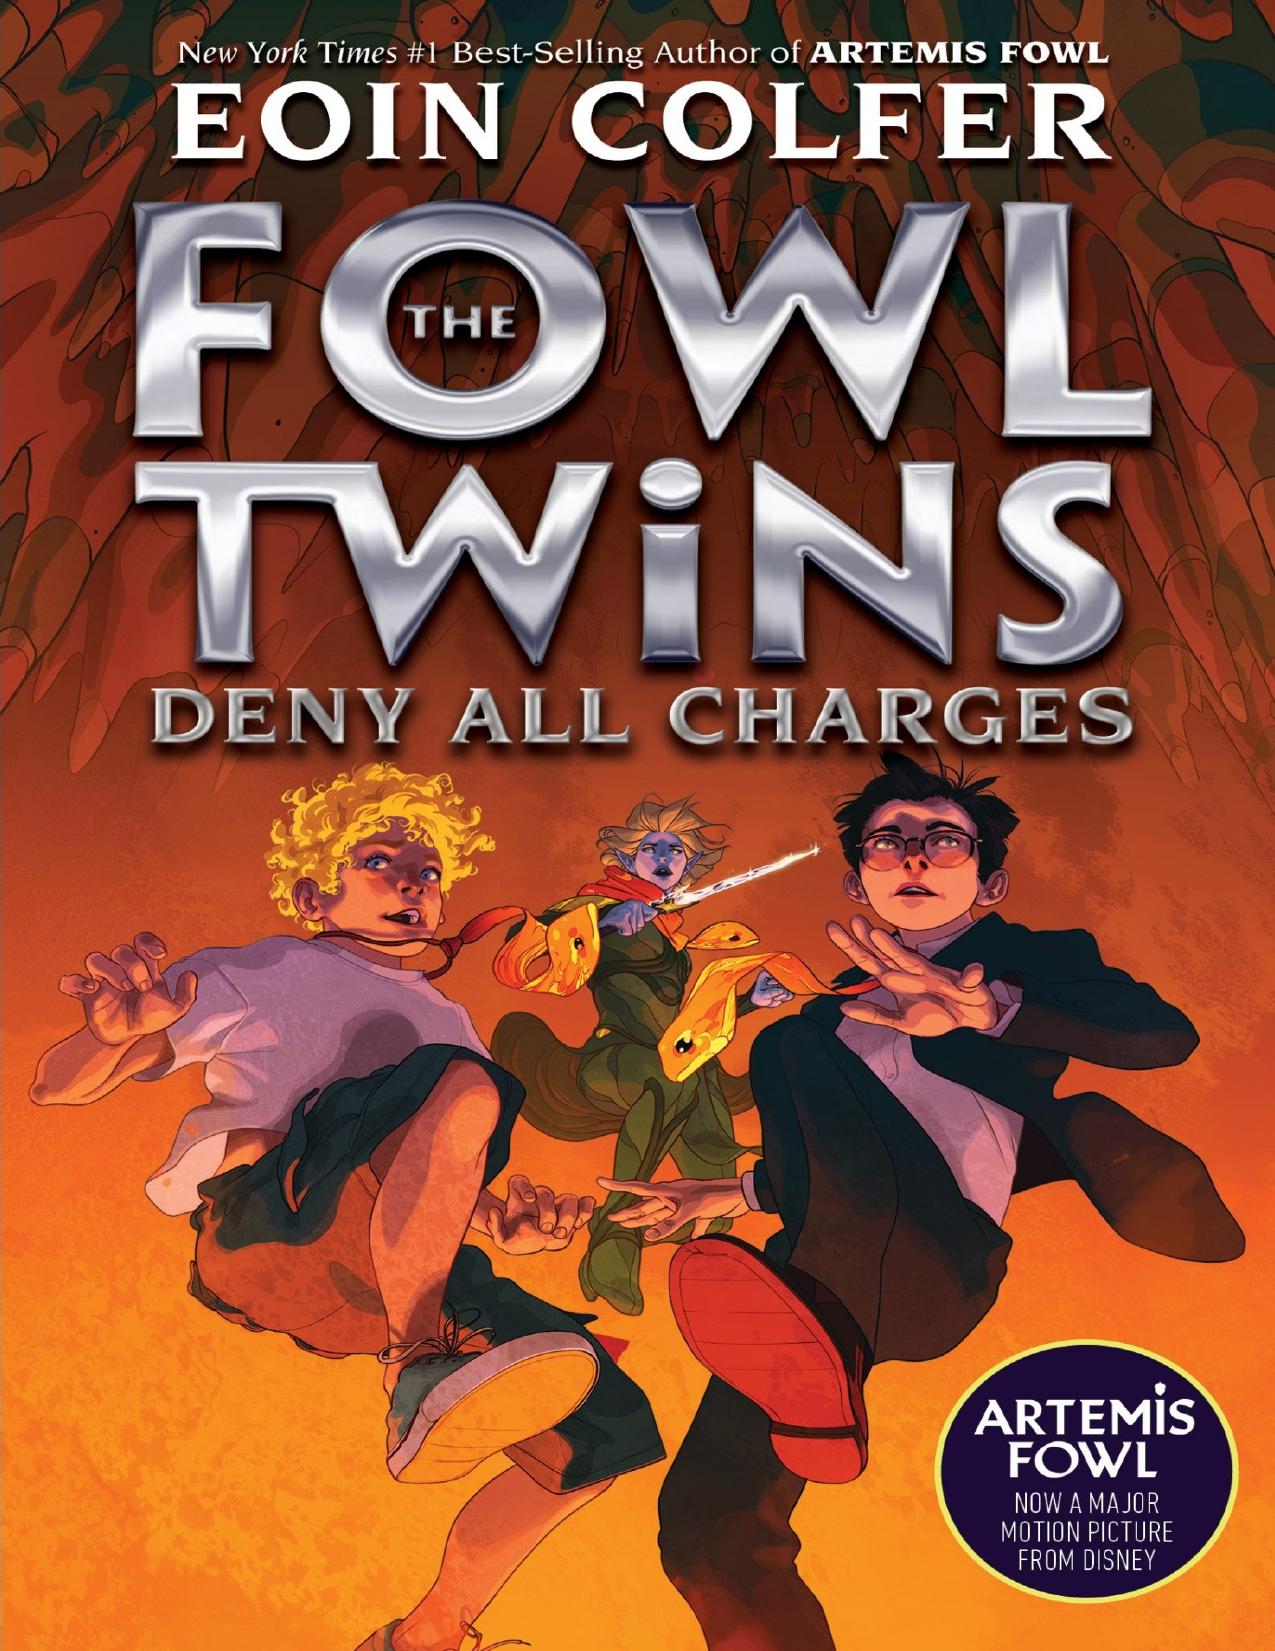 The Fowl Twins Deny All Charges by Eoin Colfer